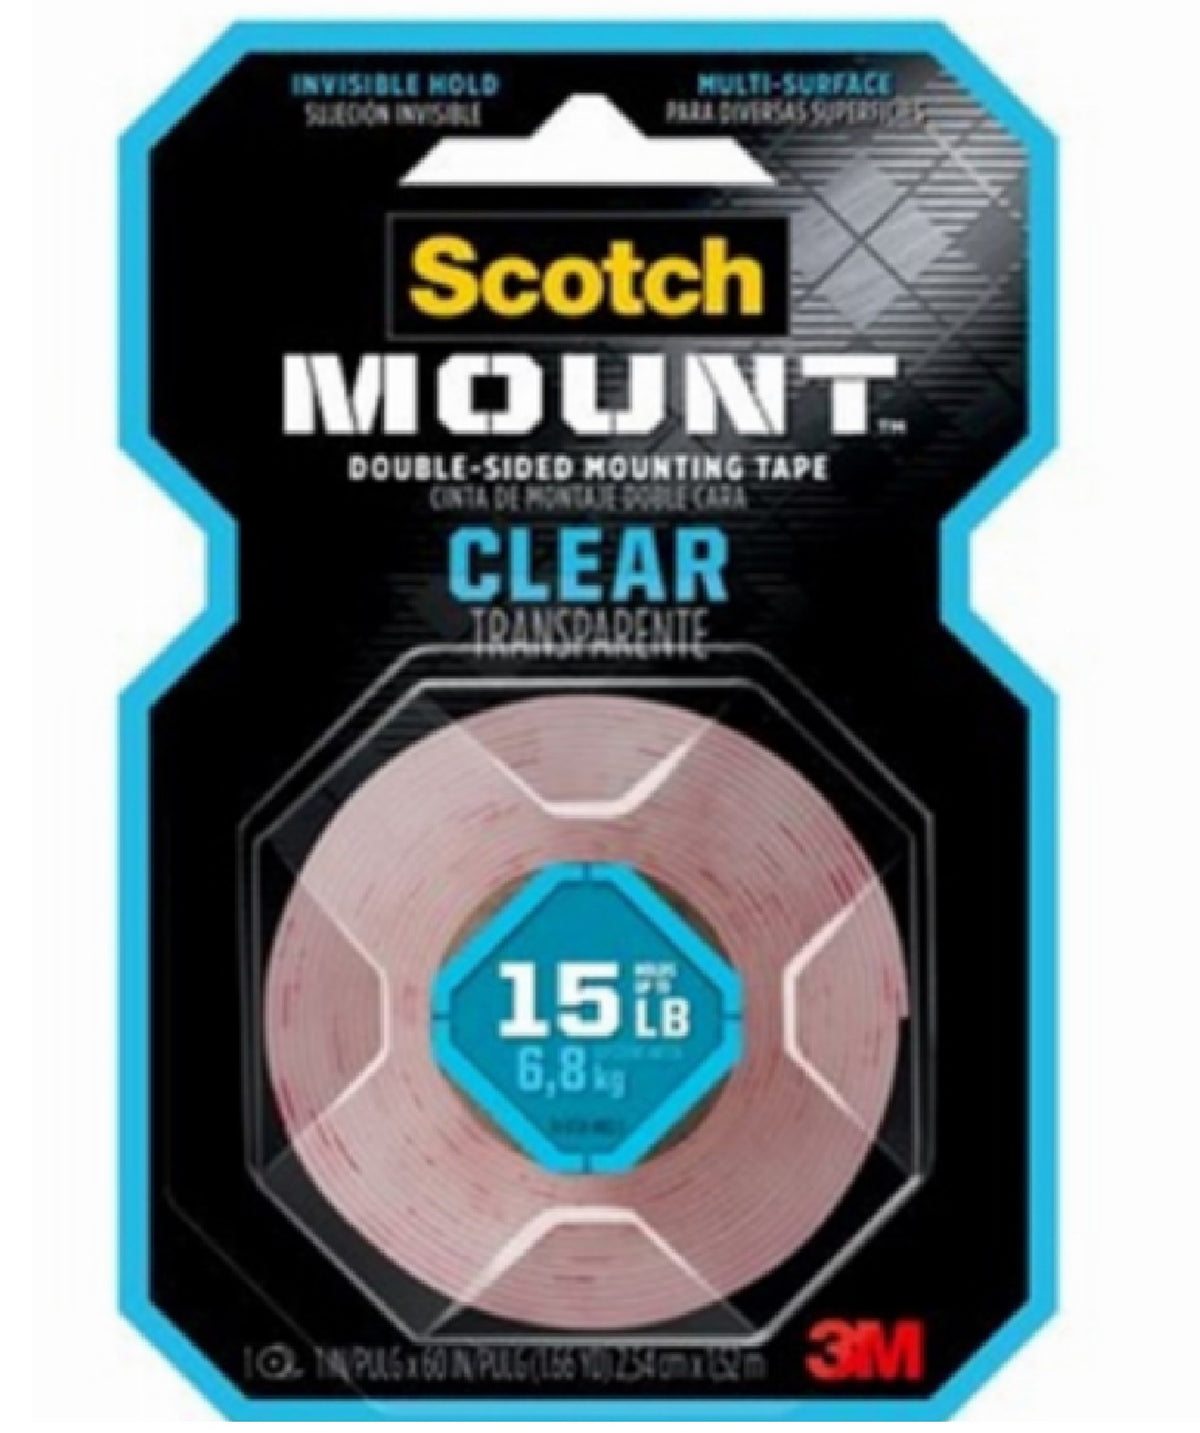 Scotch 410H-MED Mount Double-Sided Mounting Tape, Clear